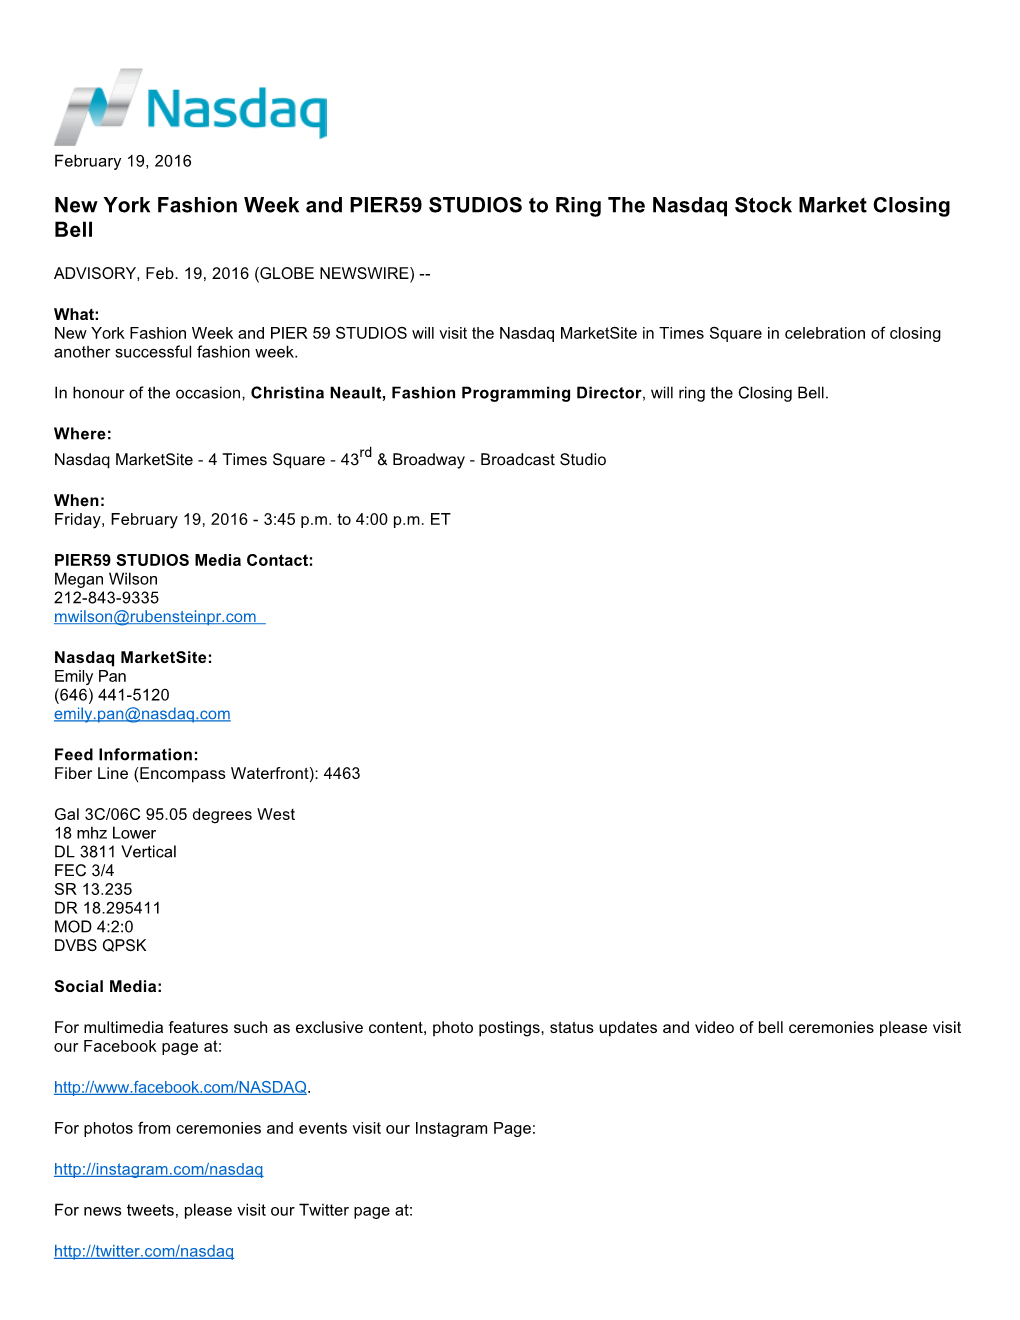 New York Fashion Week and PIER59 STUDIOS to Ring the Nasdaq Stock Market Closing Bell